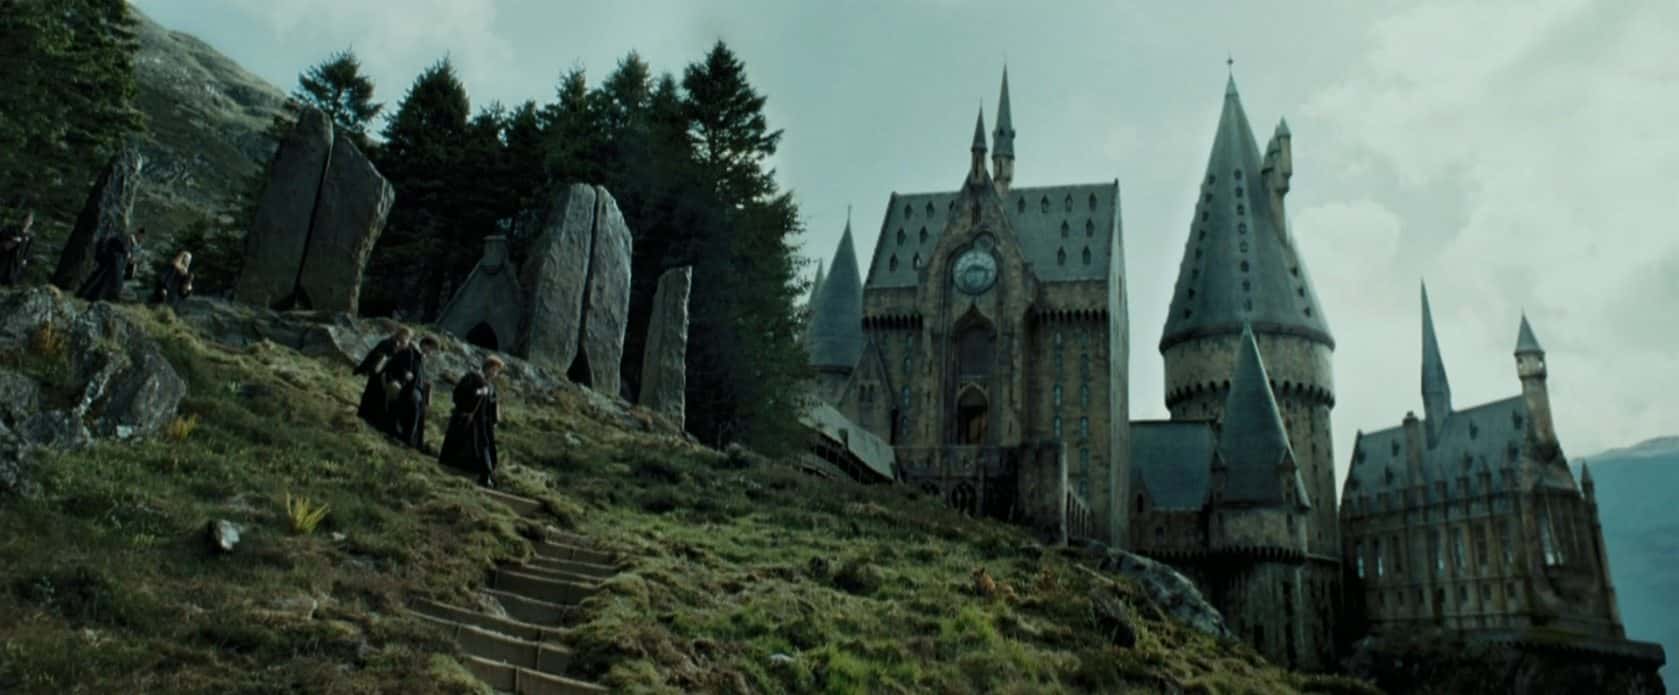 Harry Potter and the Deathly Hallows: Part 2 2011 - IMDb